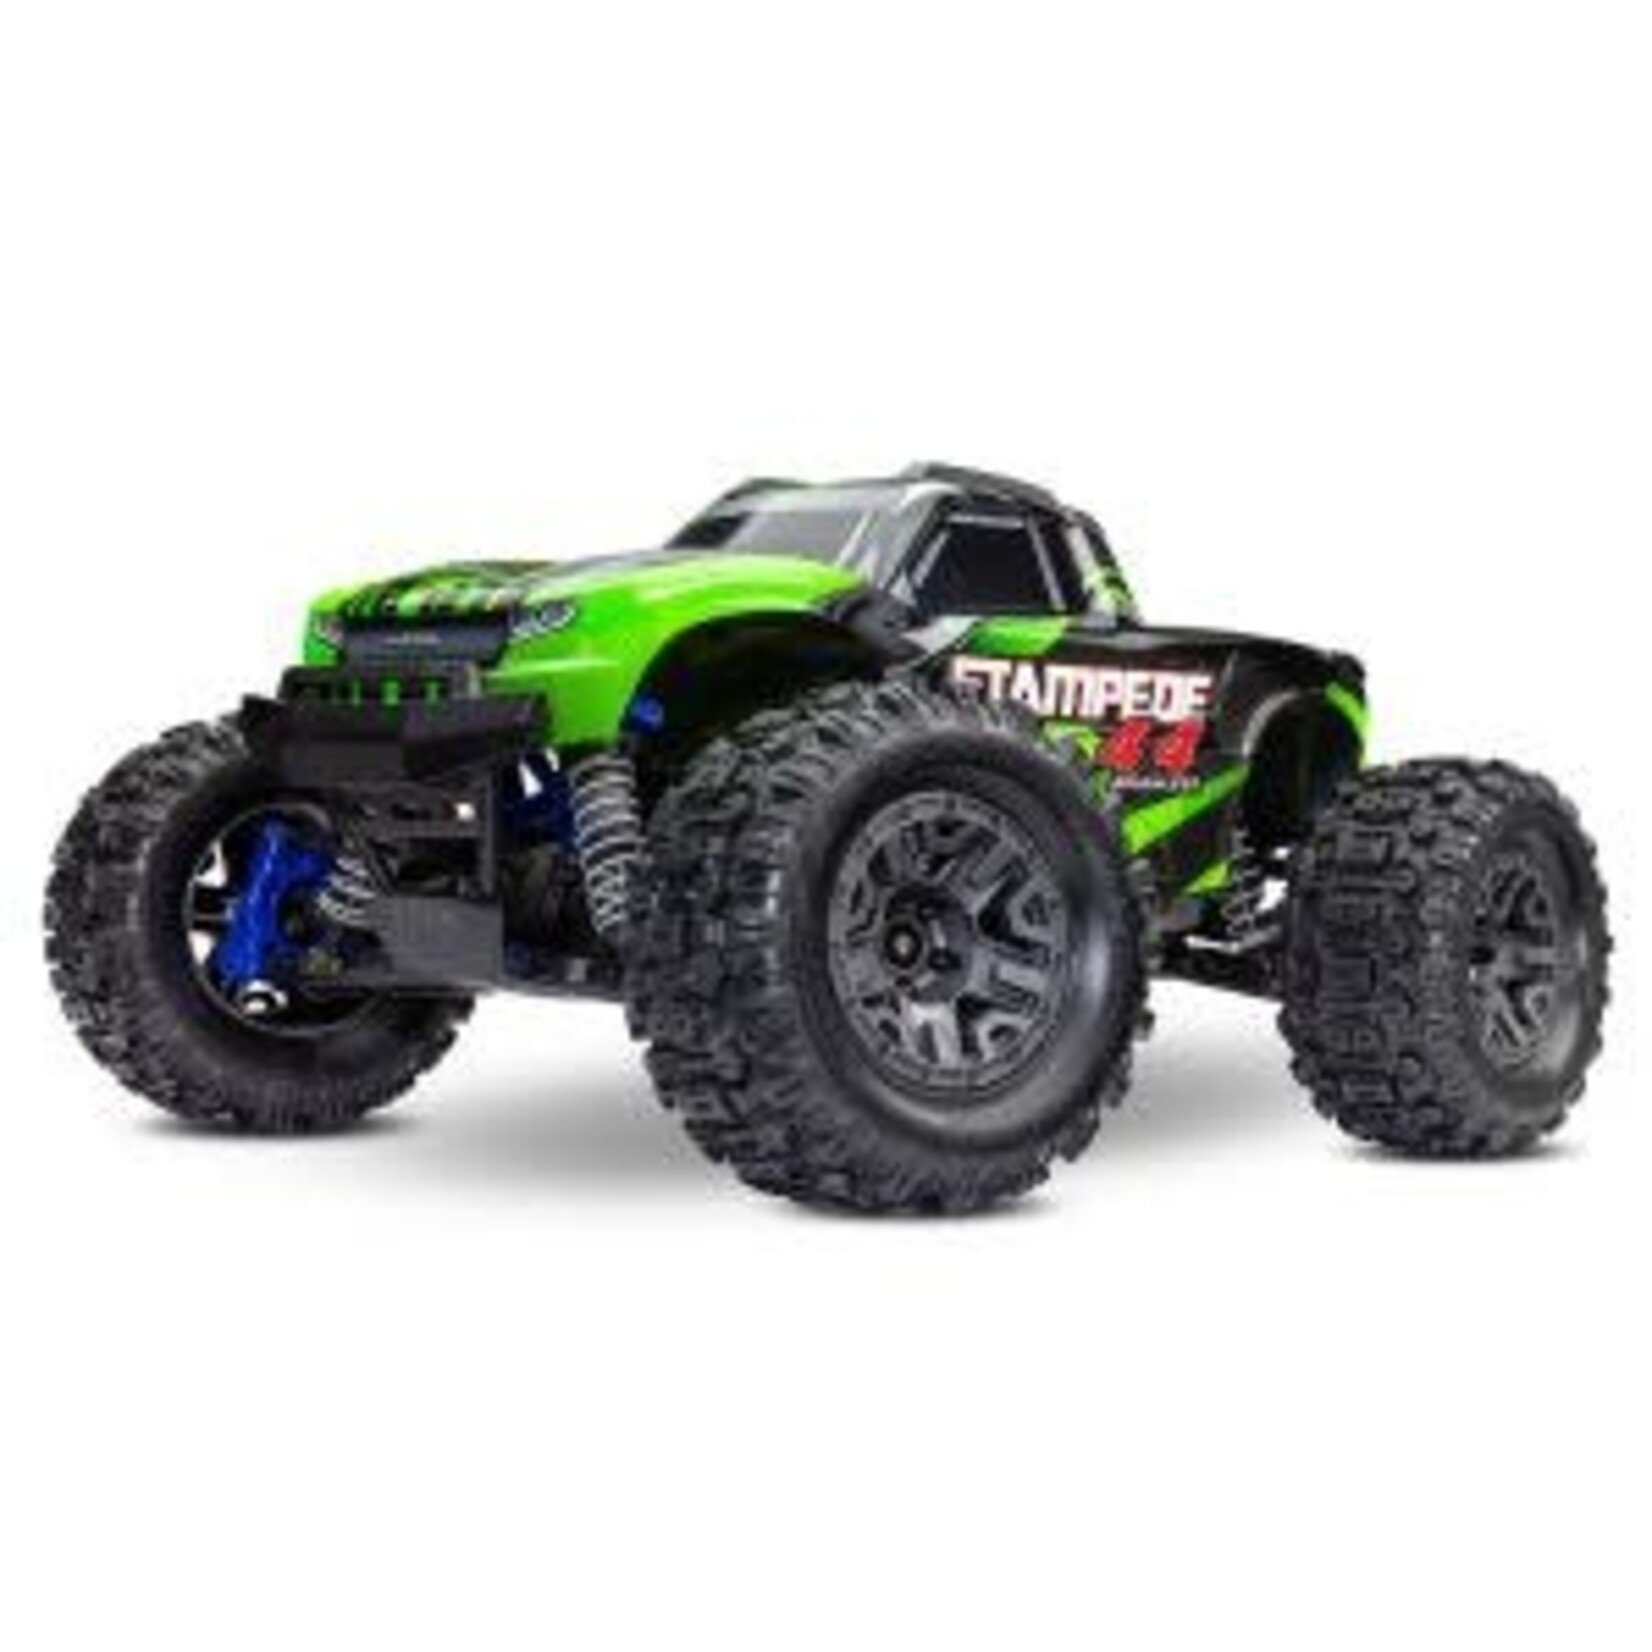 Traxxas 67154-4-FD  Stampede 4X4 BL-2s: 1/10 Scale 4WD Monster Truck